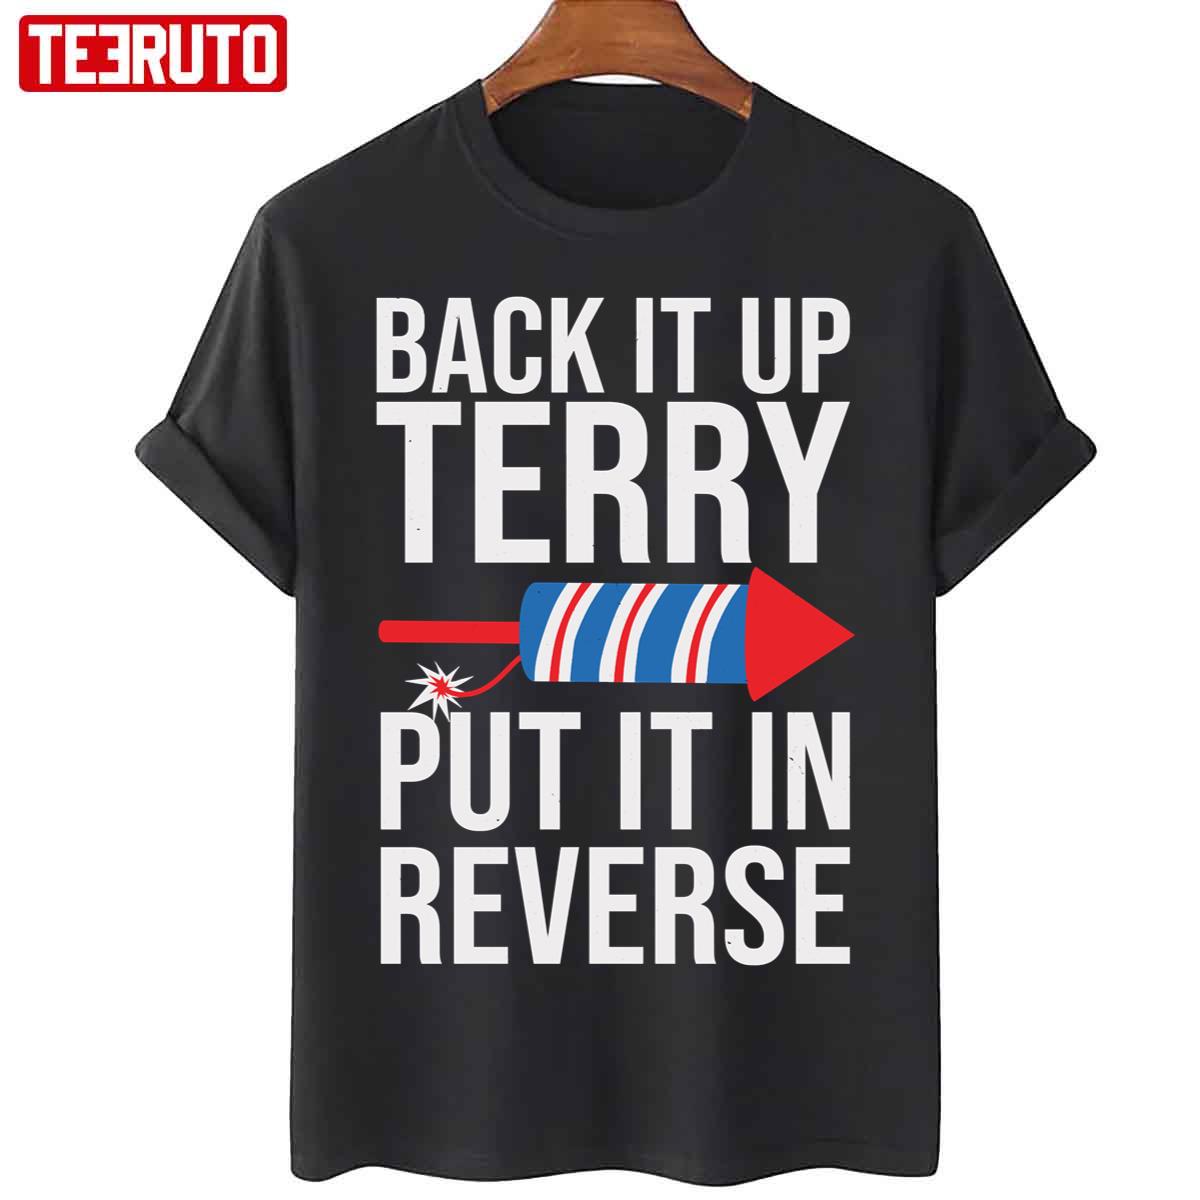 Back It Up Terry Put It In Reverse Funny 4th Of July Firework Jokes Unisex T-Shirt